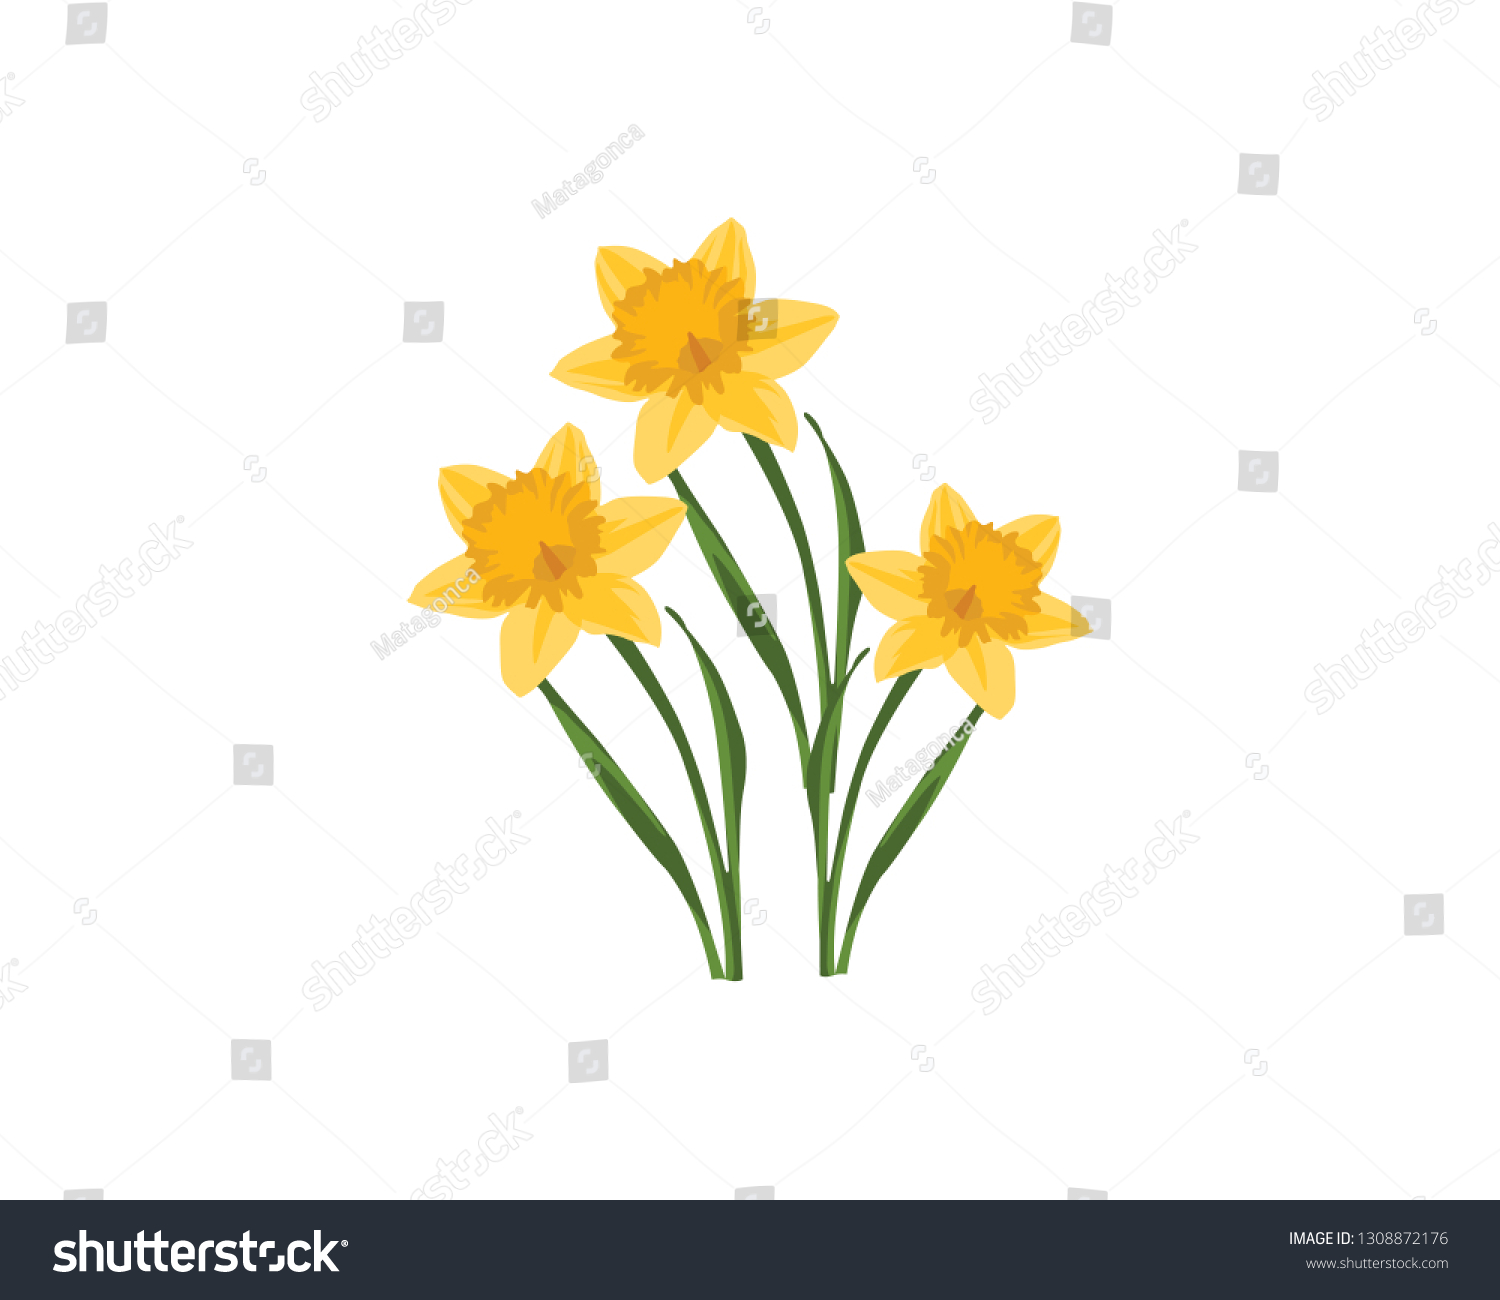 SVG of Beautiful Bouquet of three vector daffodils isolated on white background. Bouquet of yellow narcissus on the white background. Spring flower svg